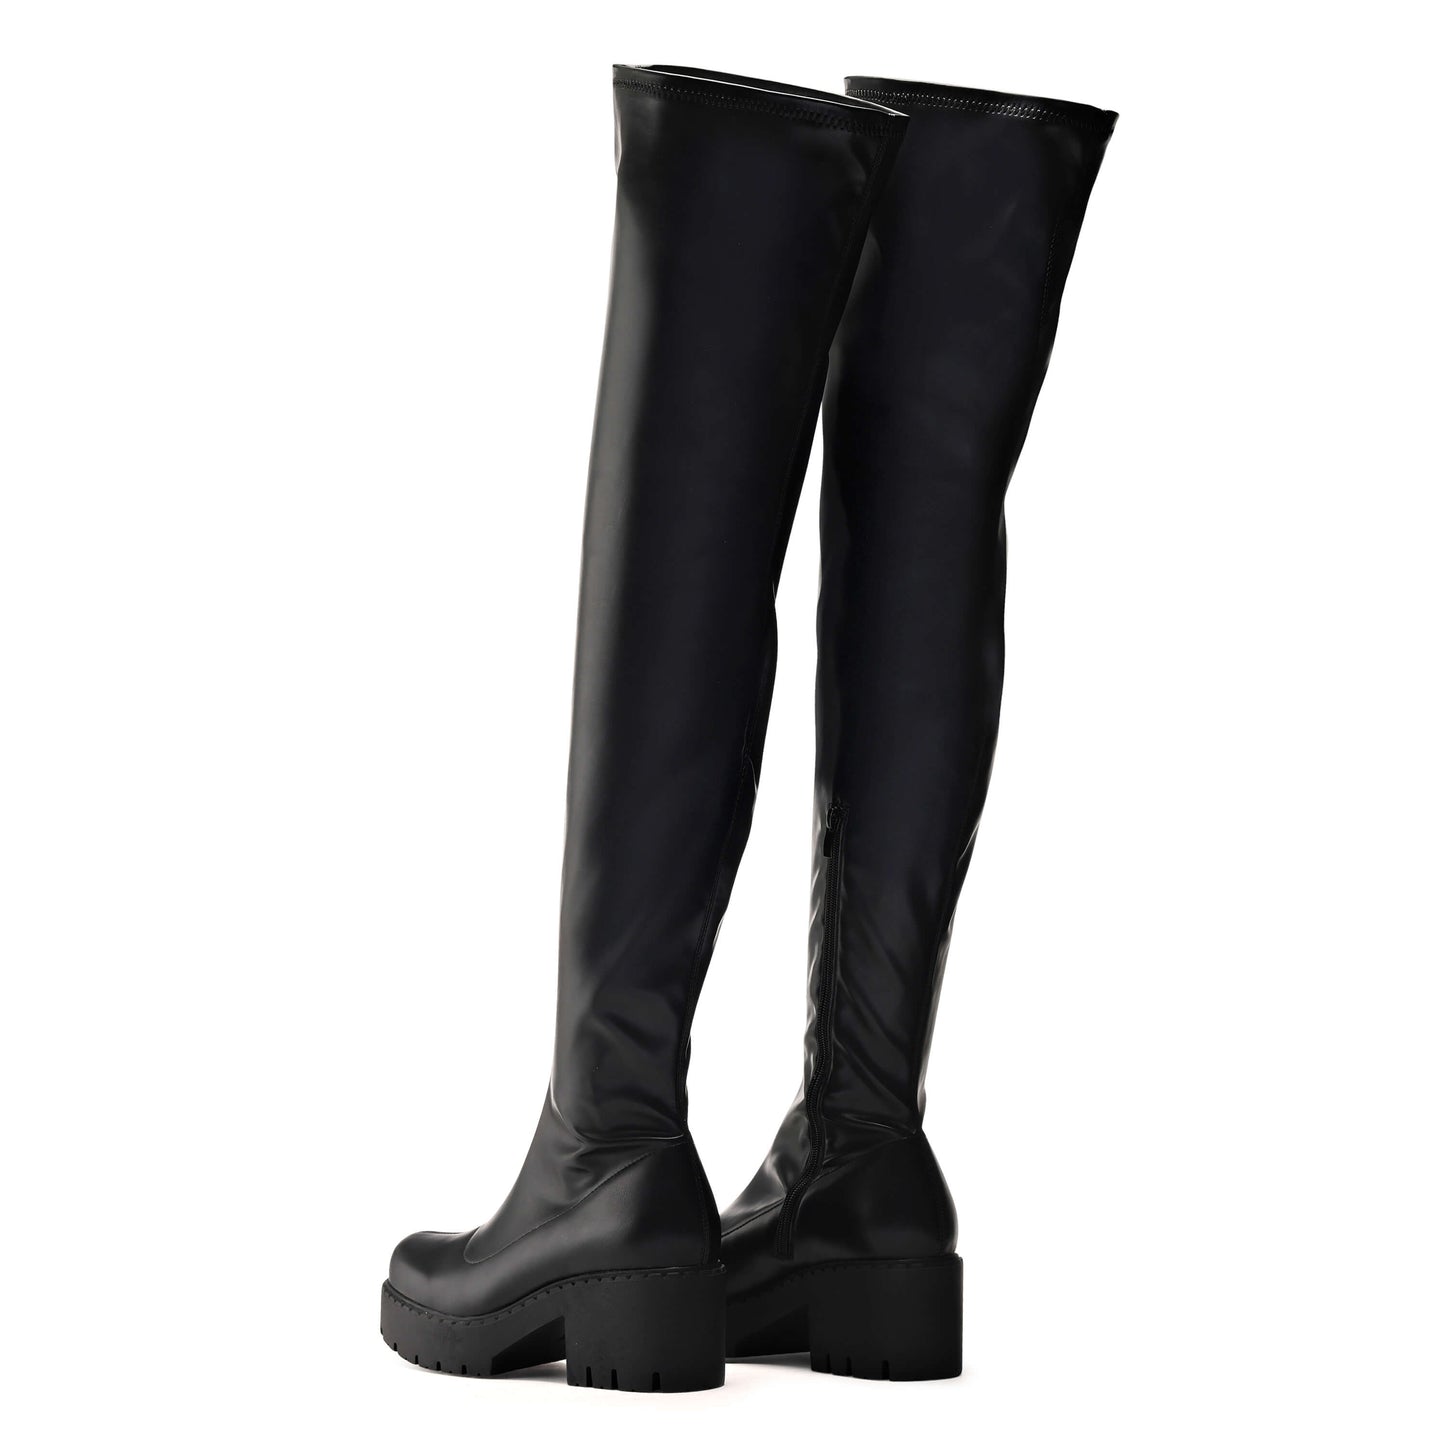 The Harmony Plus Size Thigh High Boots - Long Boots - KOI Footwear - Black - Three-Quarter View